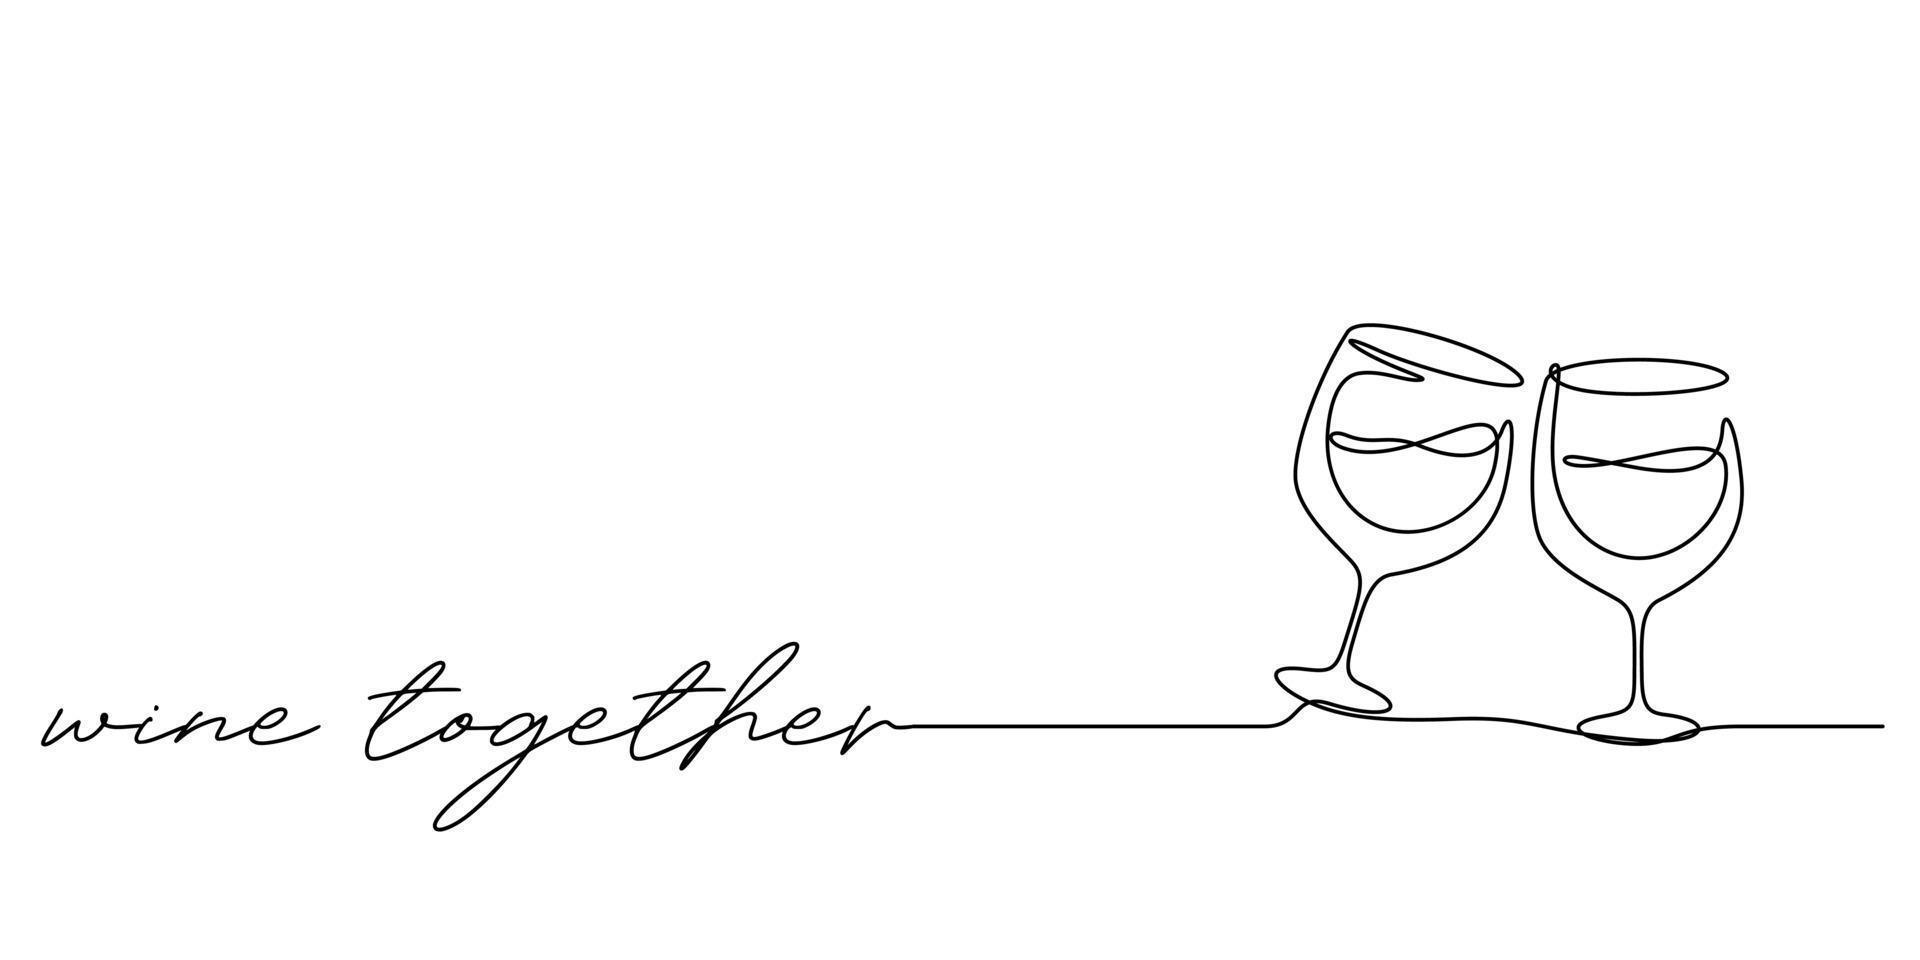 continuous line drawing of wine glasses cheers vector illustration